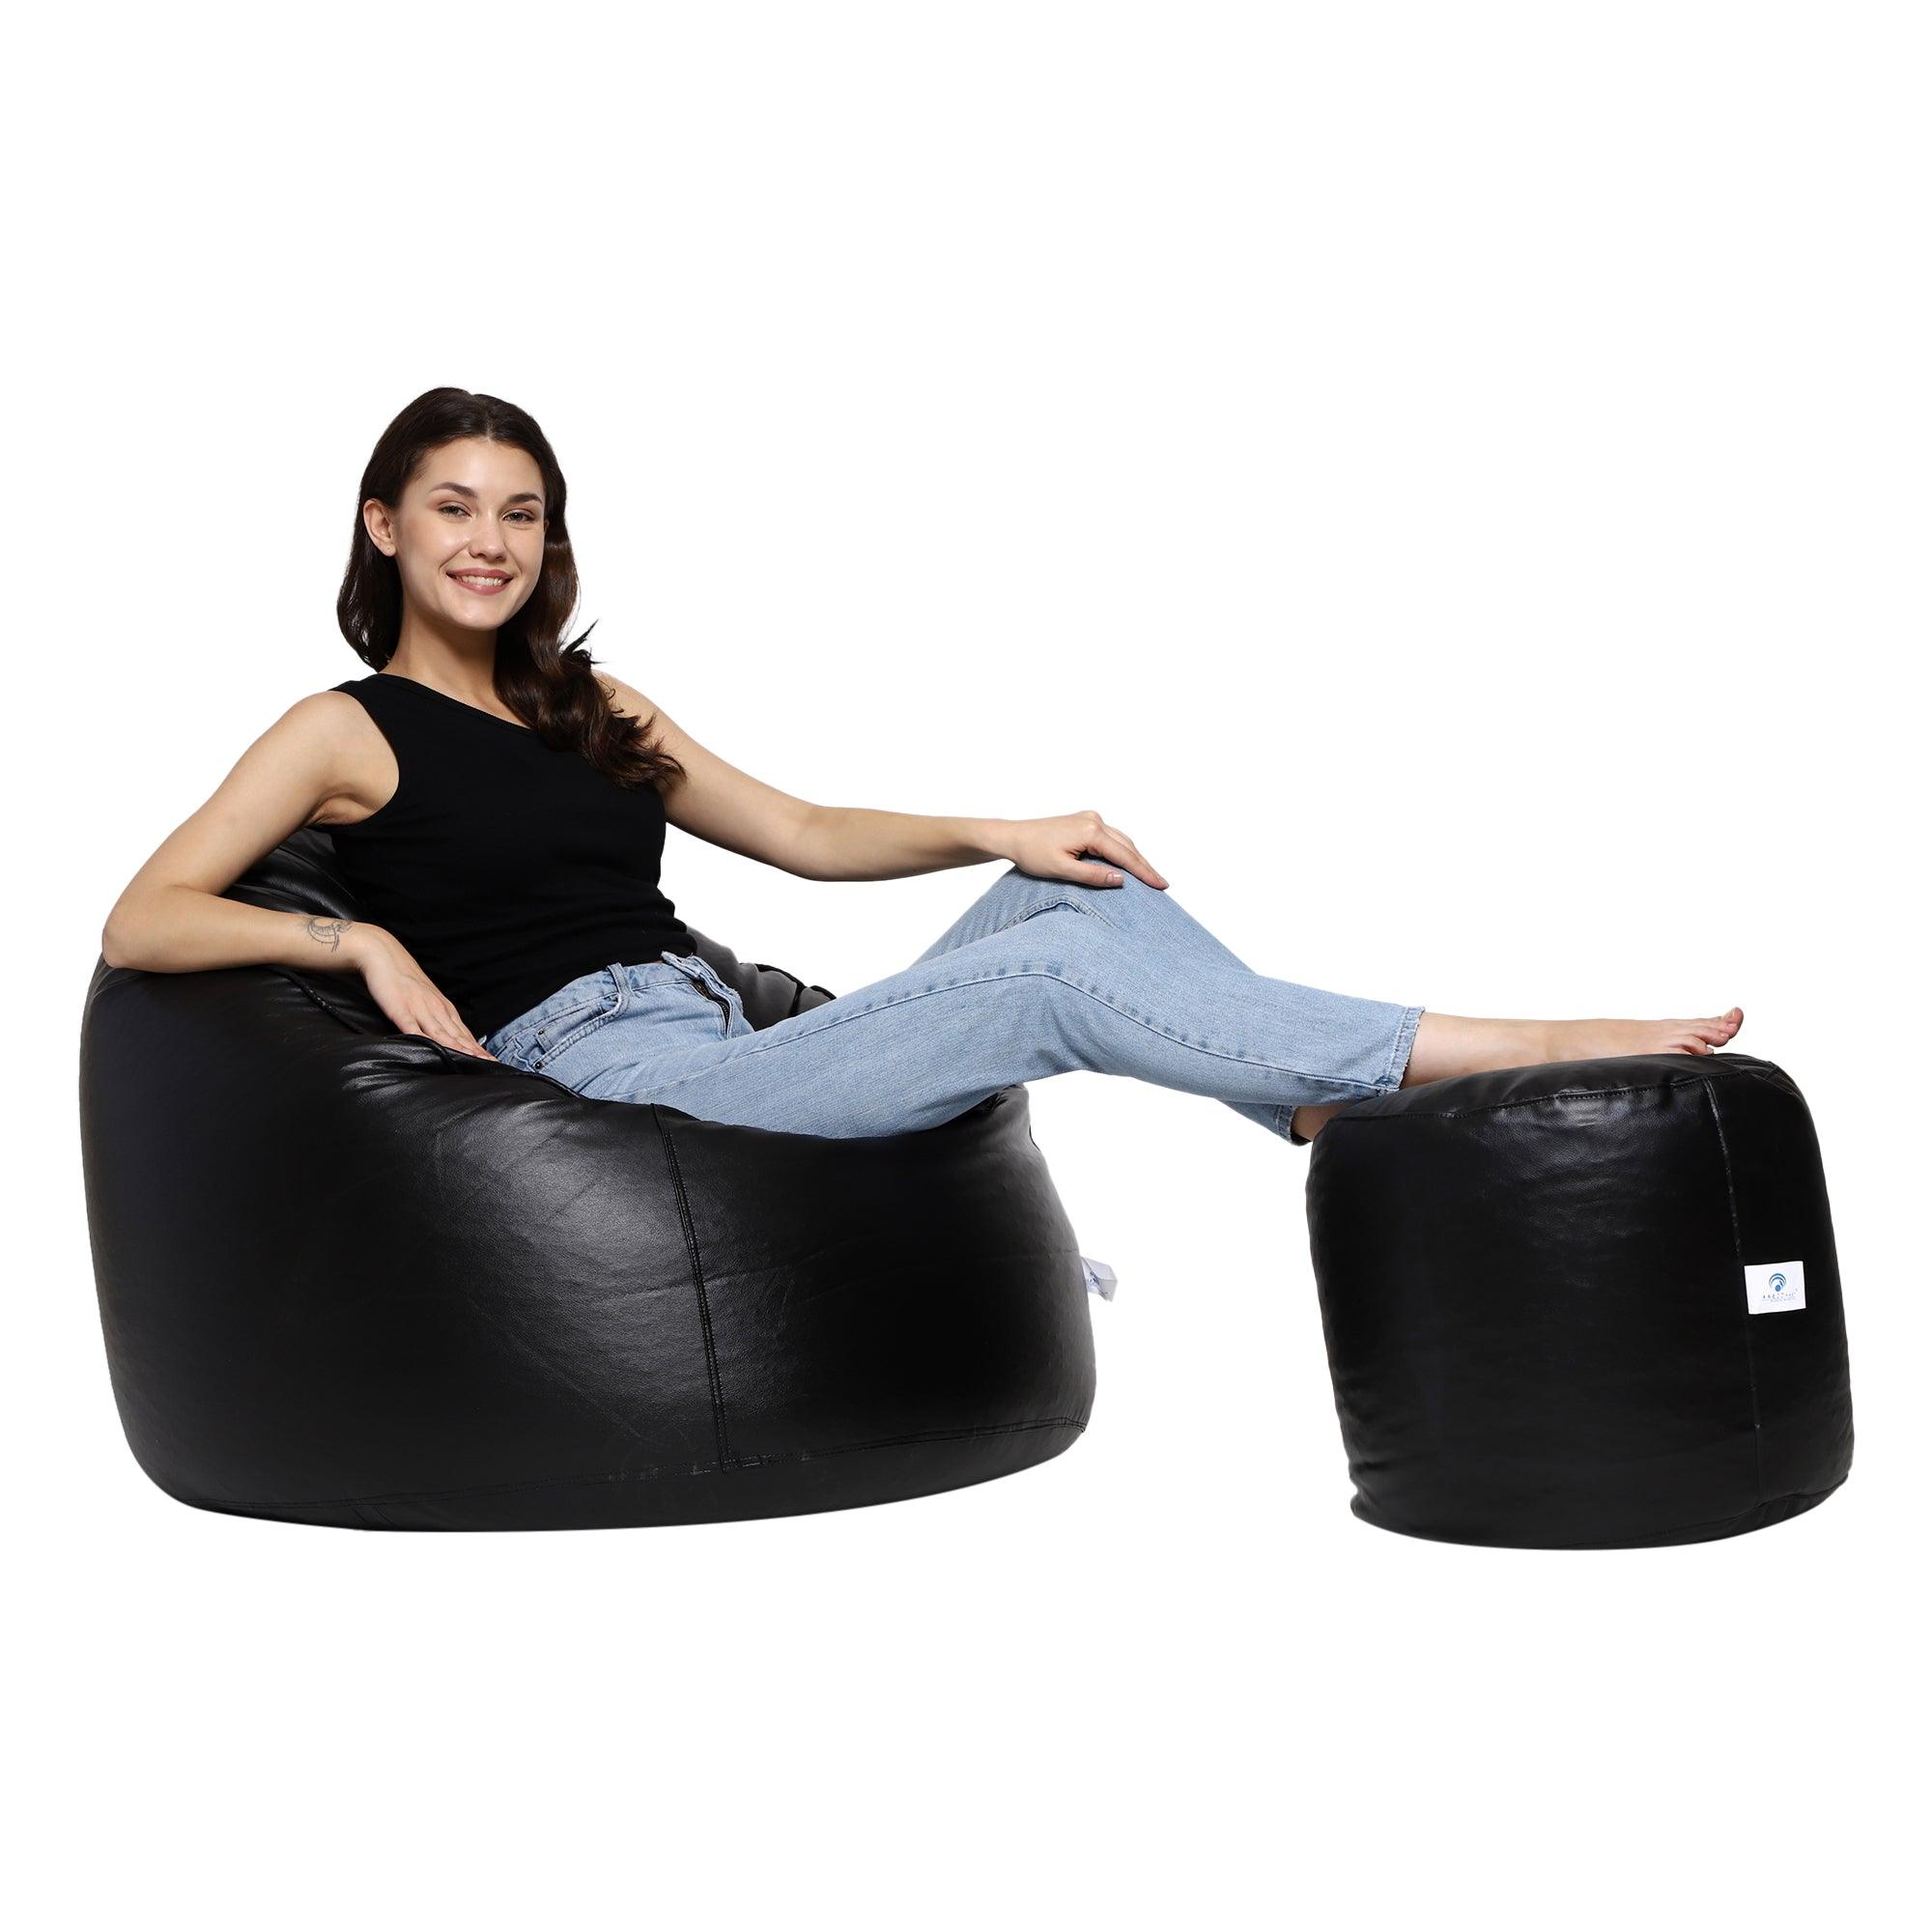 Aarij Mart Xxxl Filled With Beans Chair Sofa Bean Bag N Footrest Combo Set  (faux Leather) (tan) at Rs 2499.00